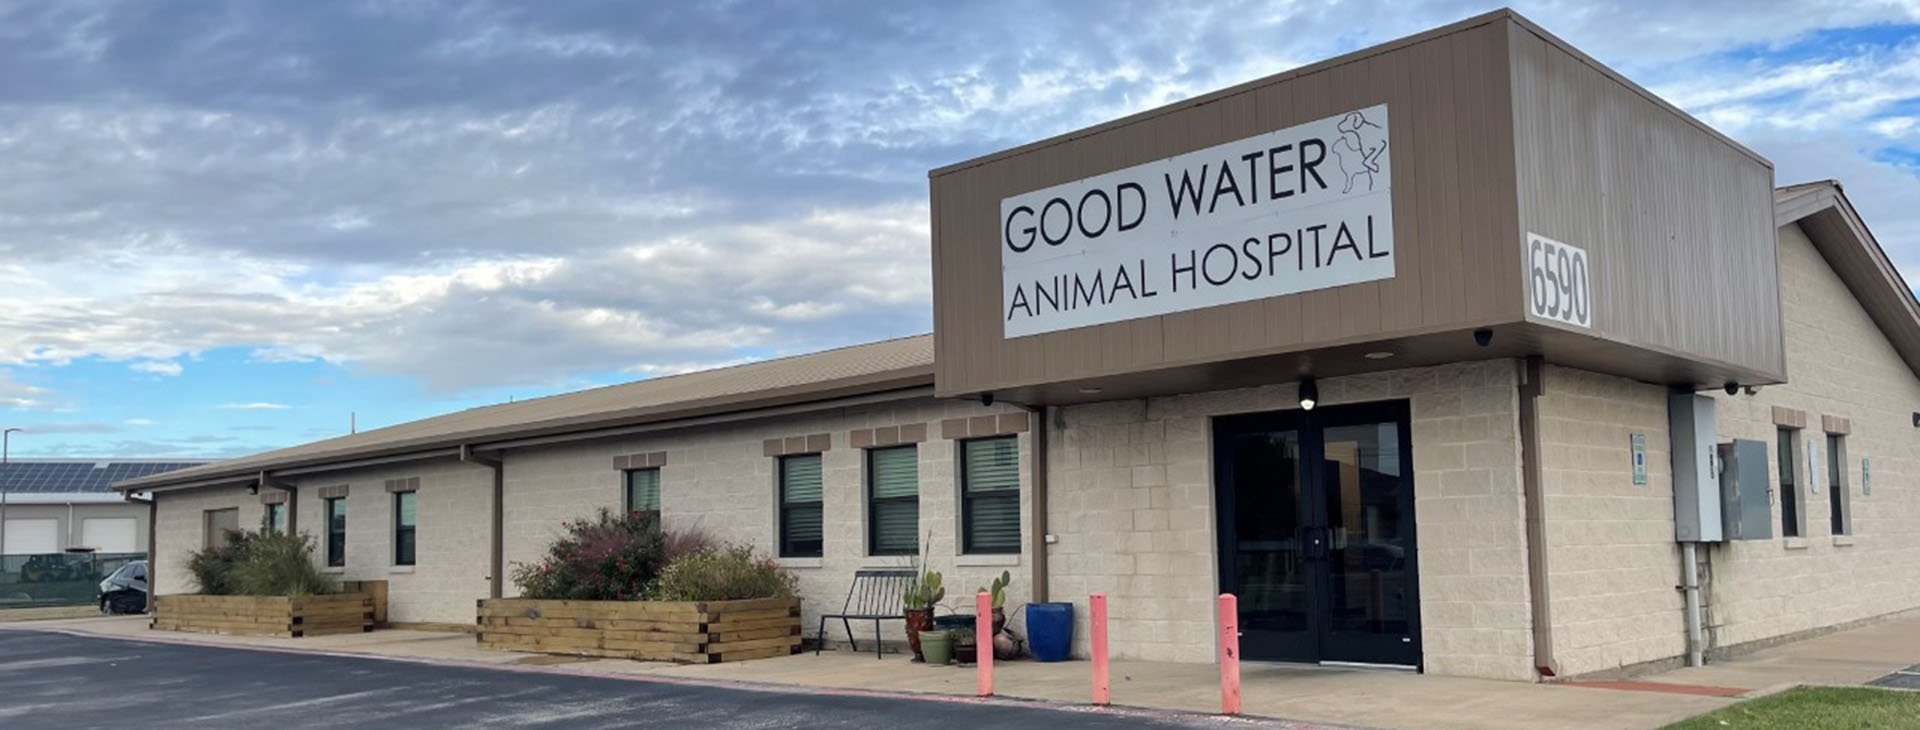 Goodwater Animal Hospital Oustide